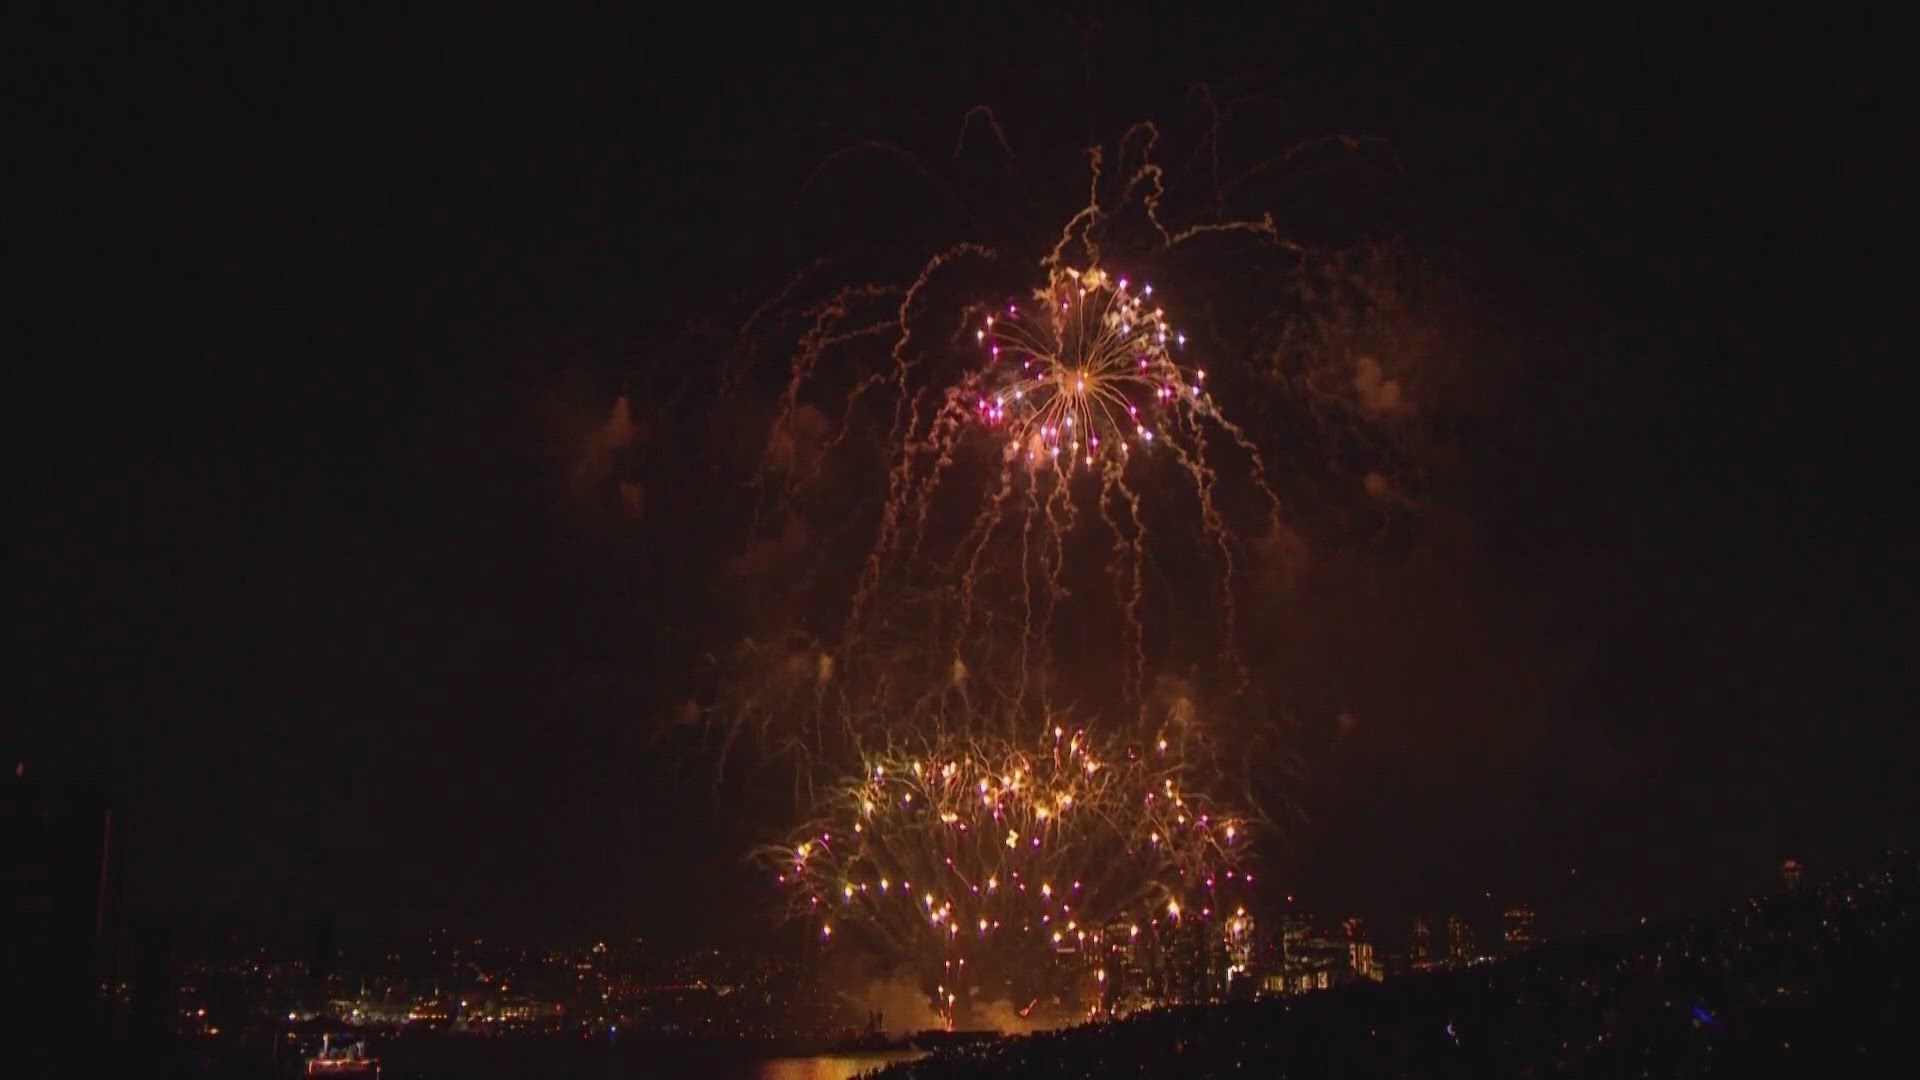 Under Washington state law, fireworks can be sold starting at 9 a.m. Friday.